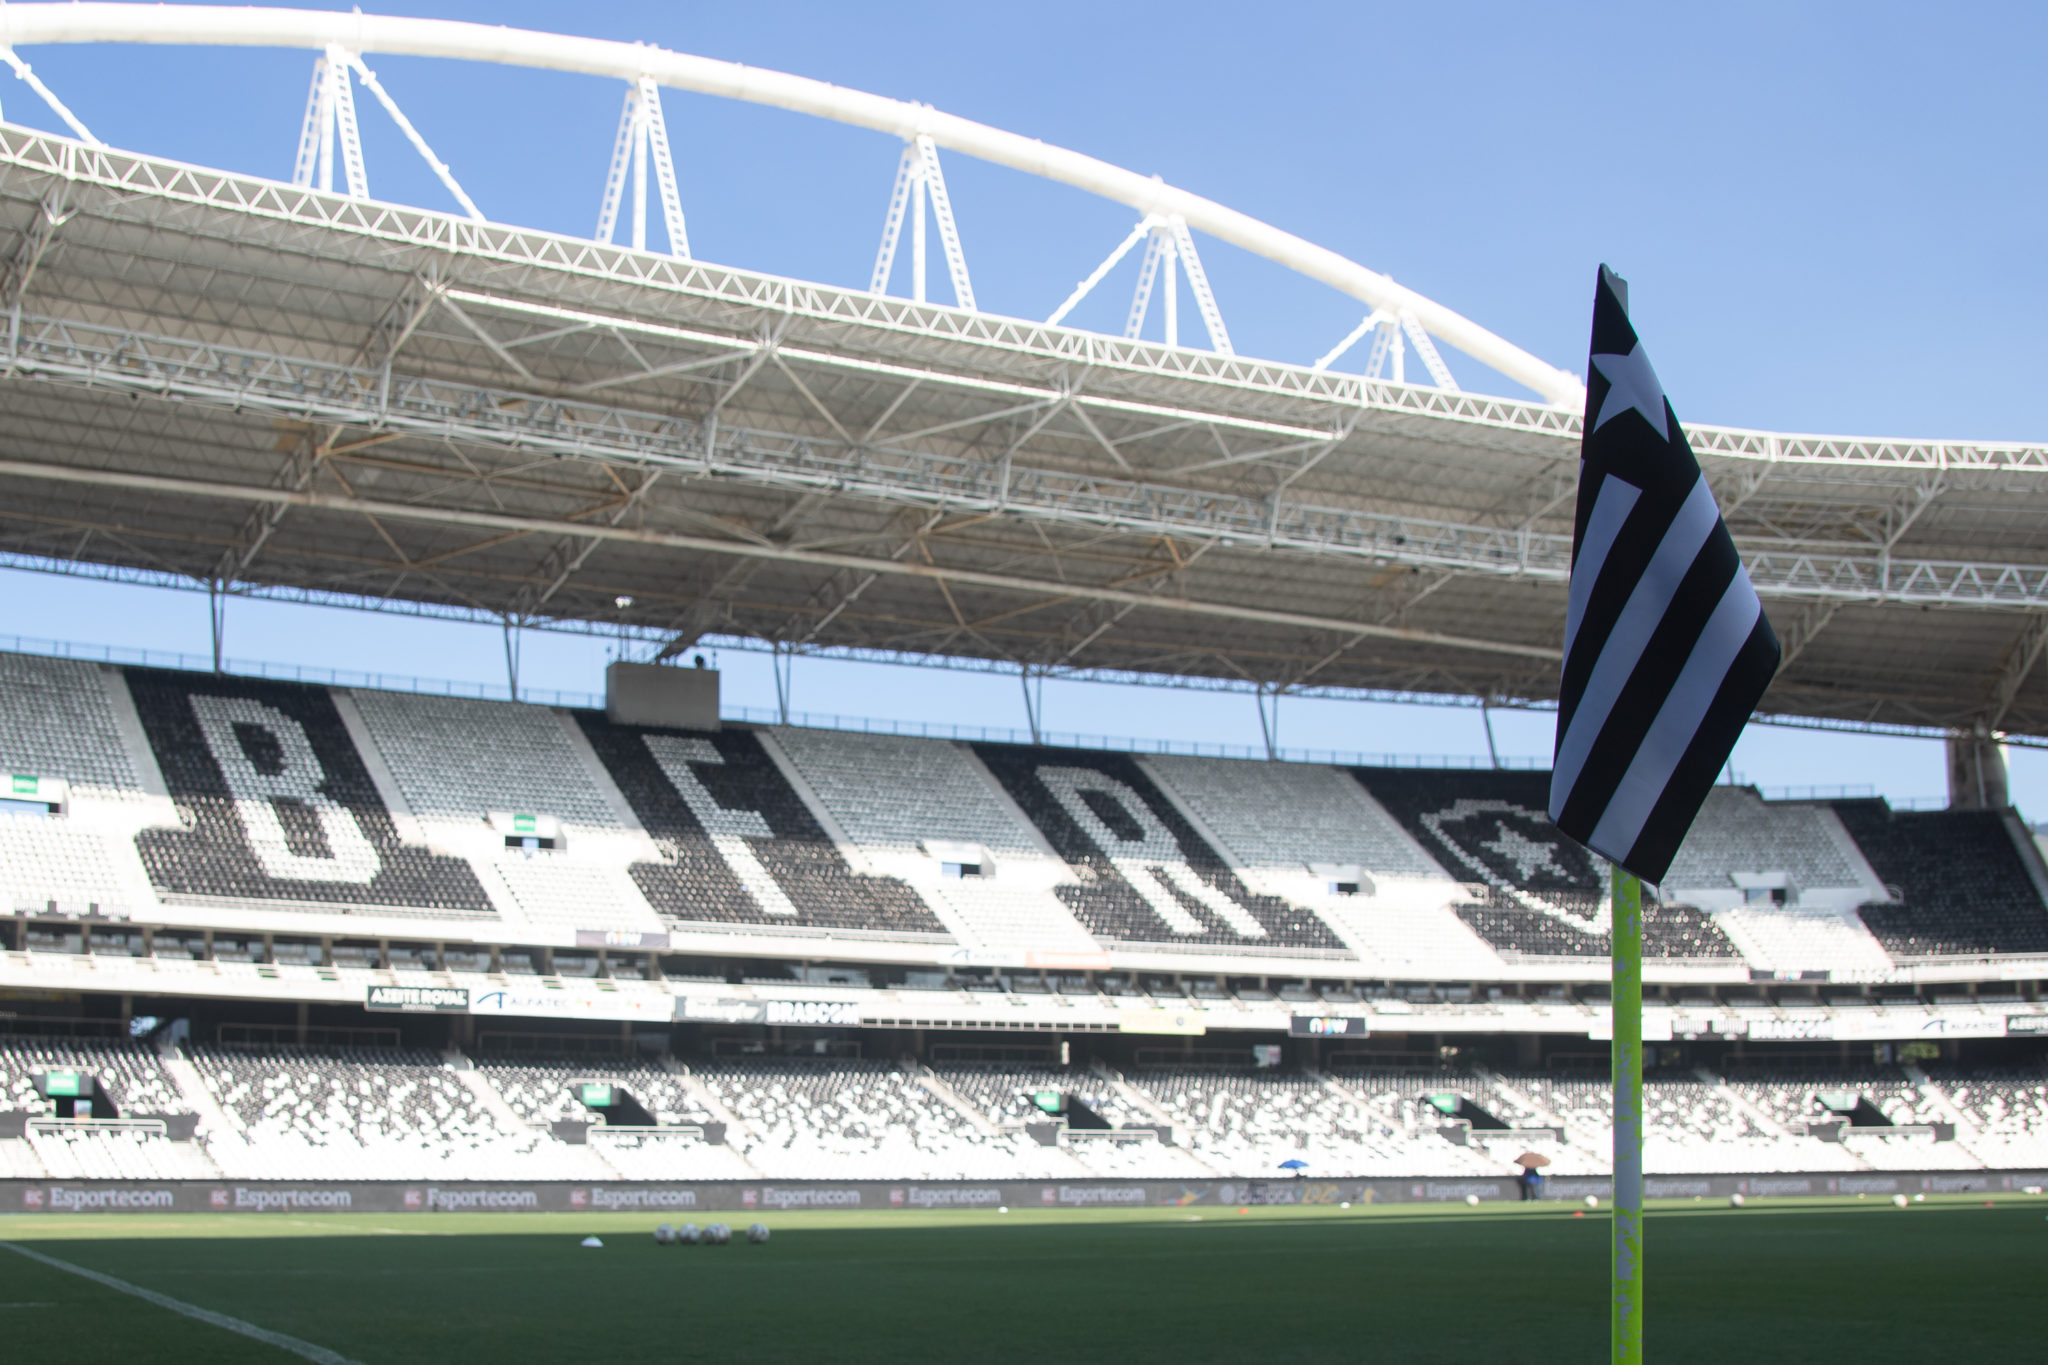 View of the Botafogo's Nilton Santos empty stadium, as it is forbidden to held audience due to the spread of the new Coronavirus, before the game against Bangu, where the Japonese midfielder Keisuke Honda will debut for Botafogo, in Rio de Janeiro, Brazil, on March 15, 2020. (Photo by DIEGO MARANHAO / AFP) (Photo by DIEGO MARANHAO/AFP via Getty Images)